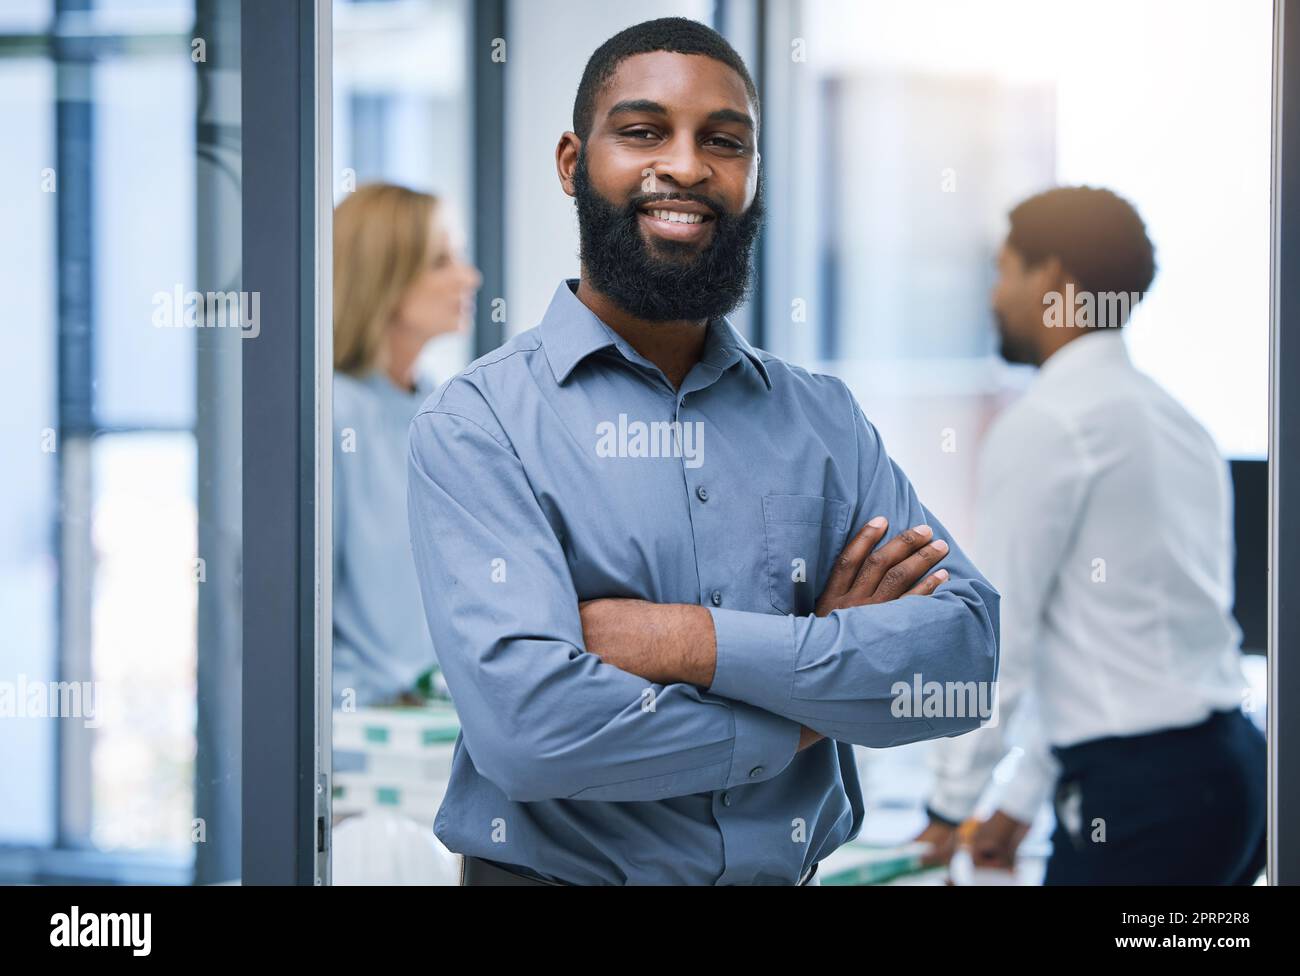 Confident and leadership portrait of a businessman in office meeting with vision for success, business recruitment and company growth. Smile of black man, manager or boss in a professional workplace Stock Photo